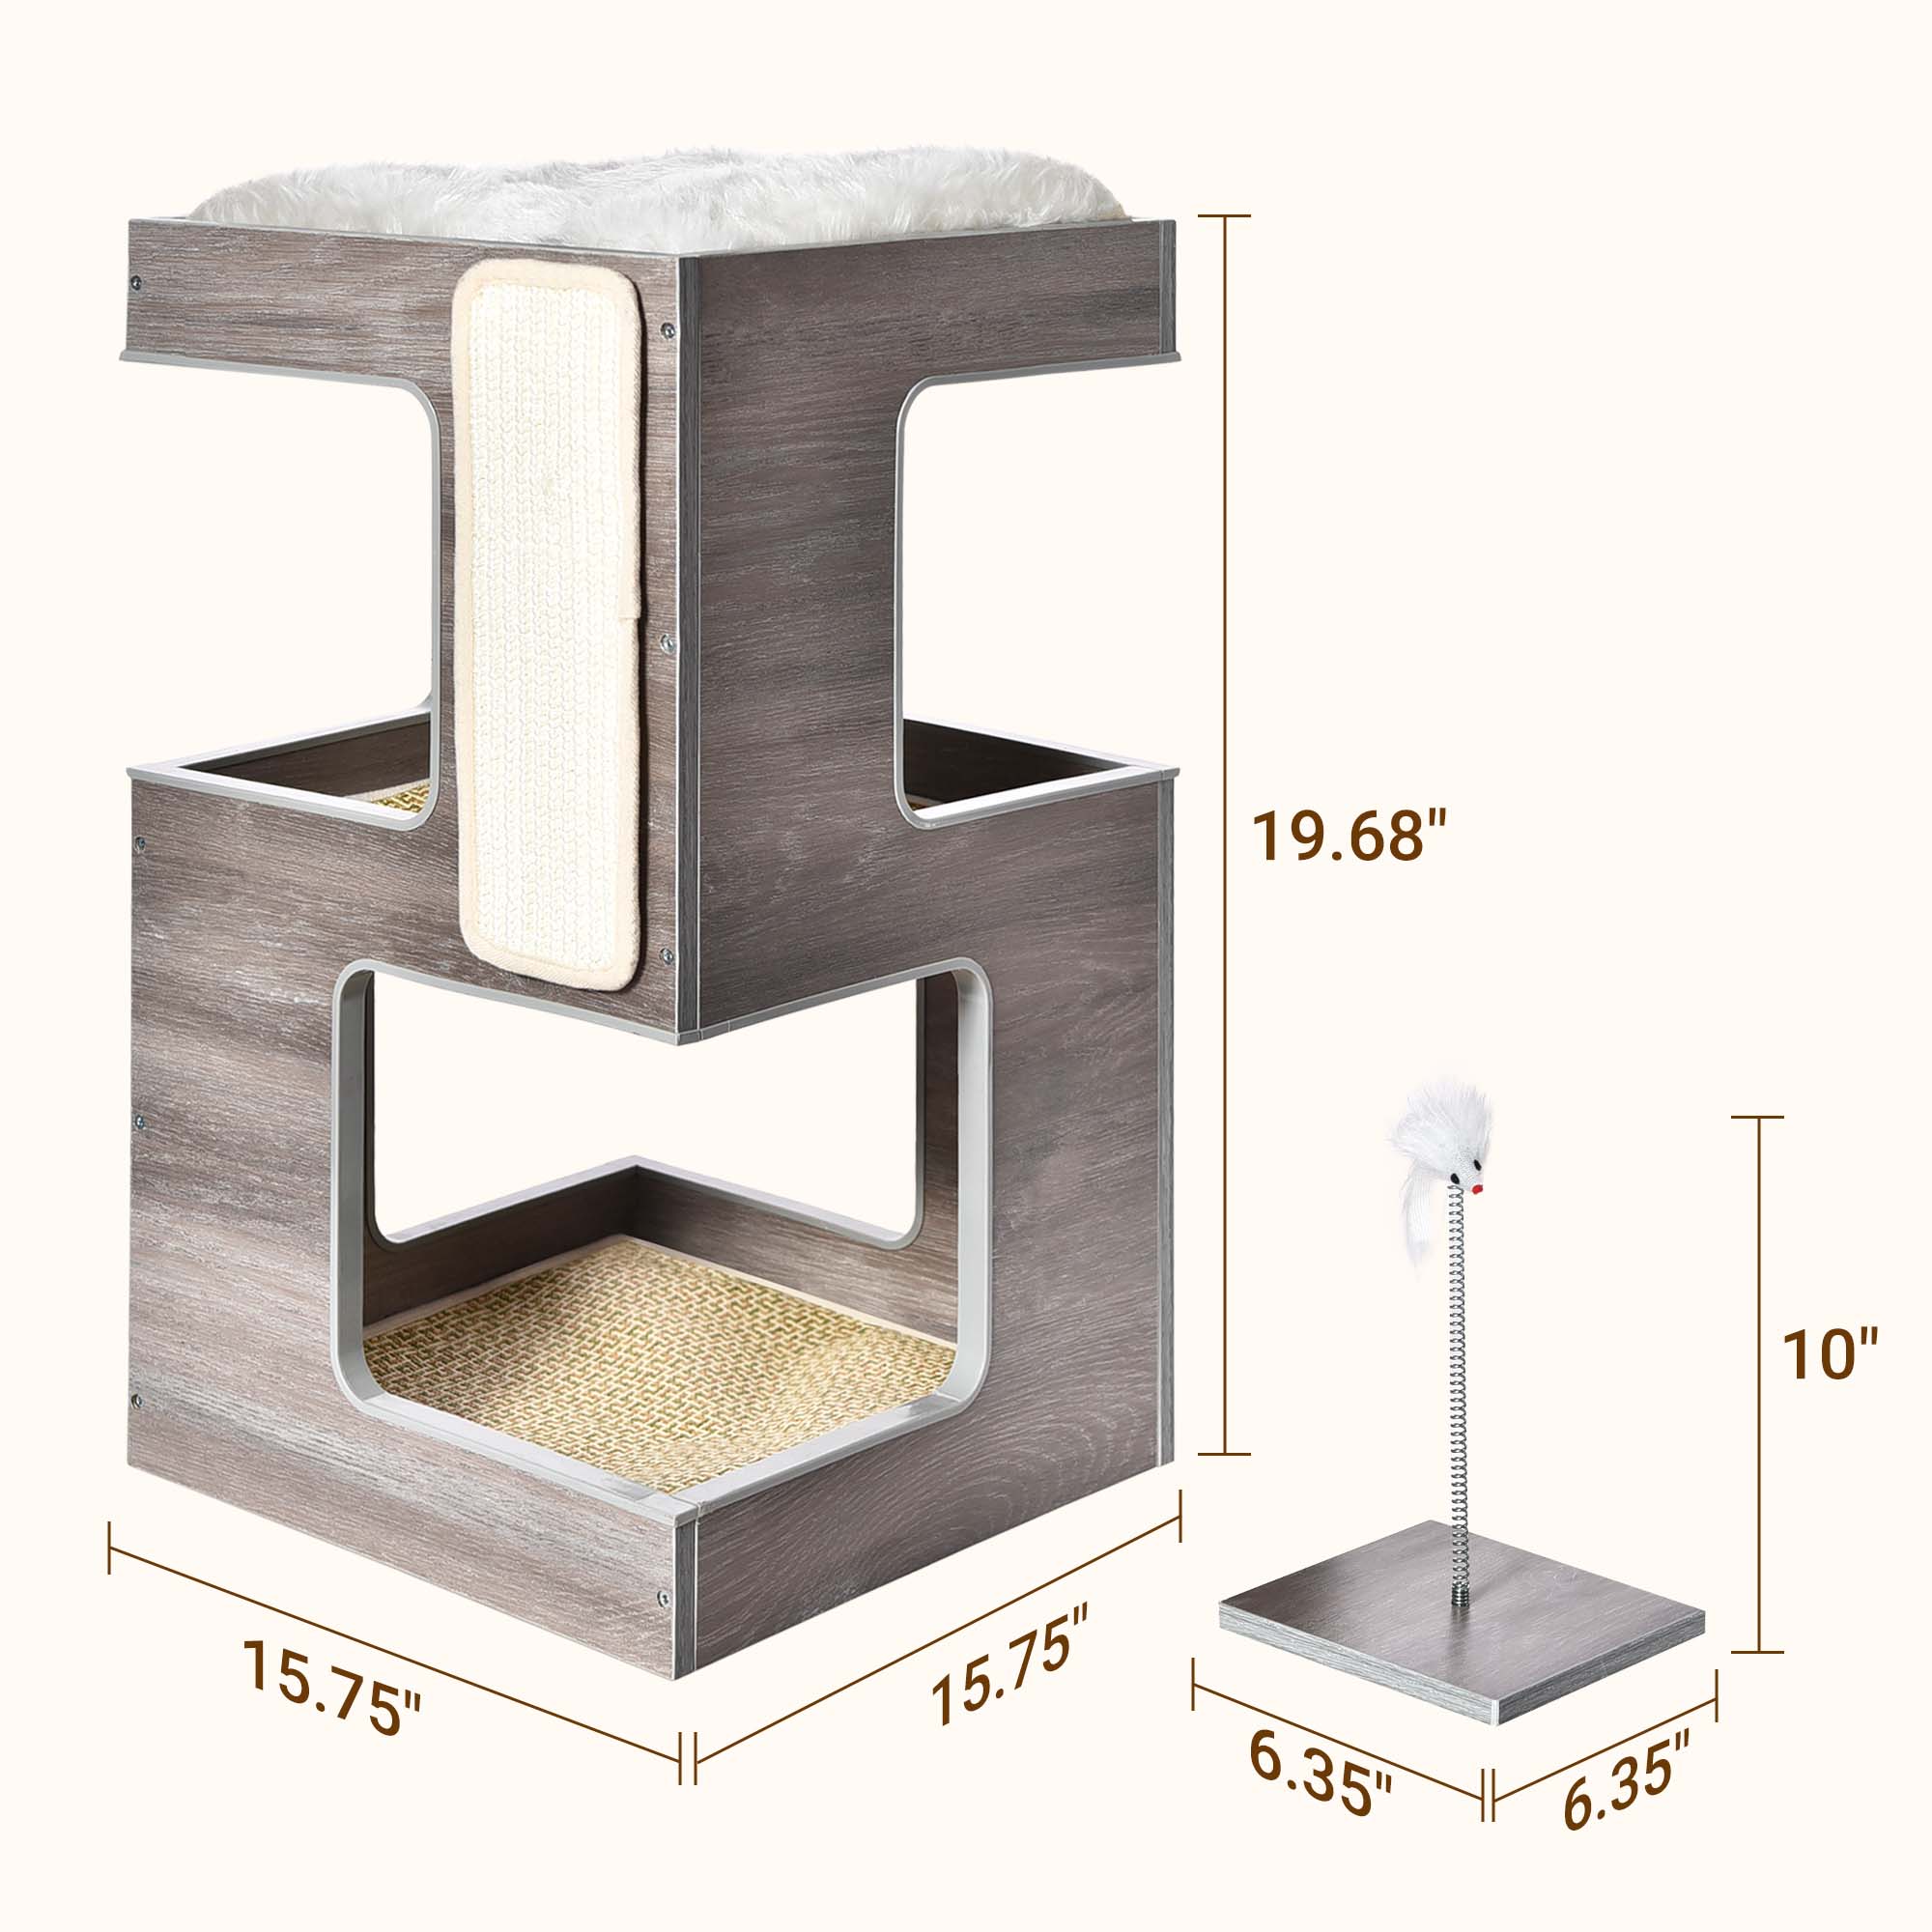 3-in-1 Wooden Cat Condo with Nightstand Function